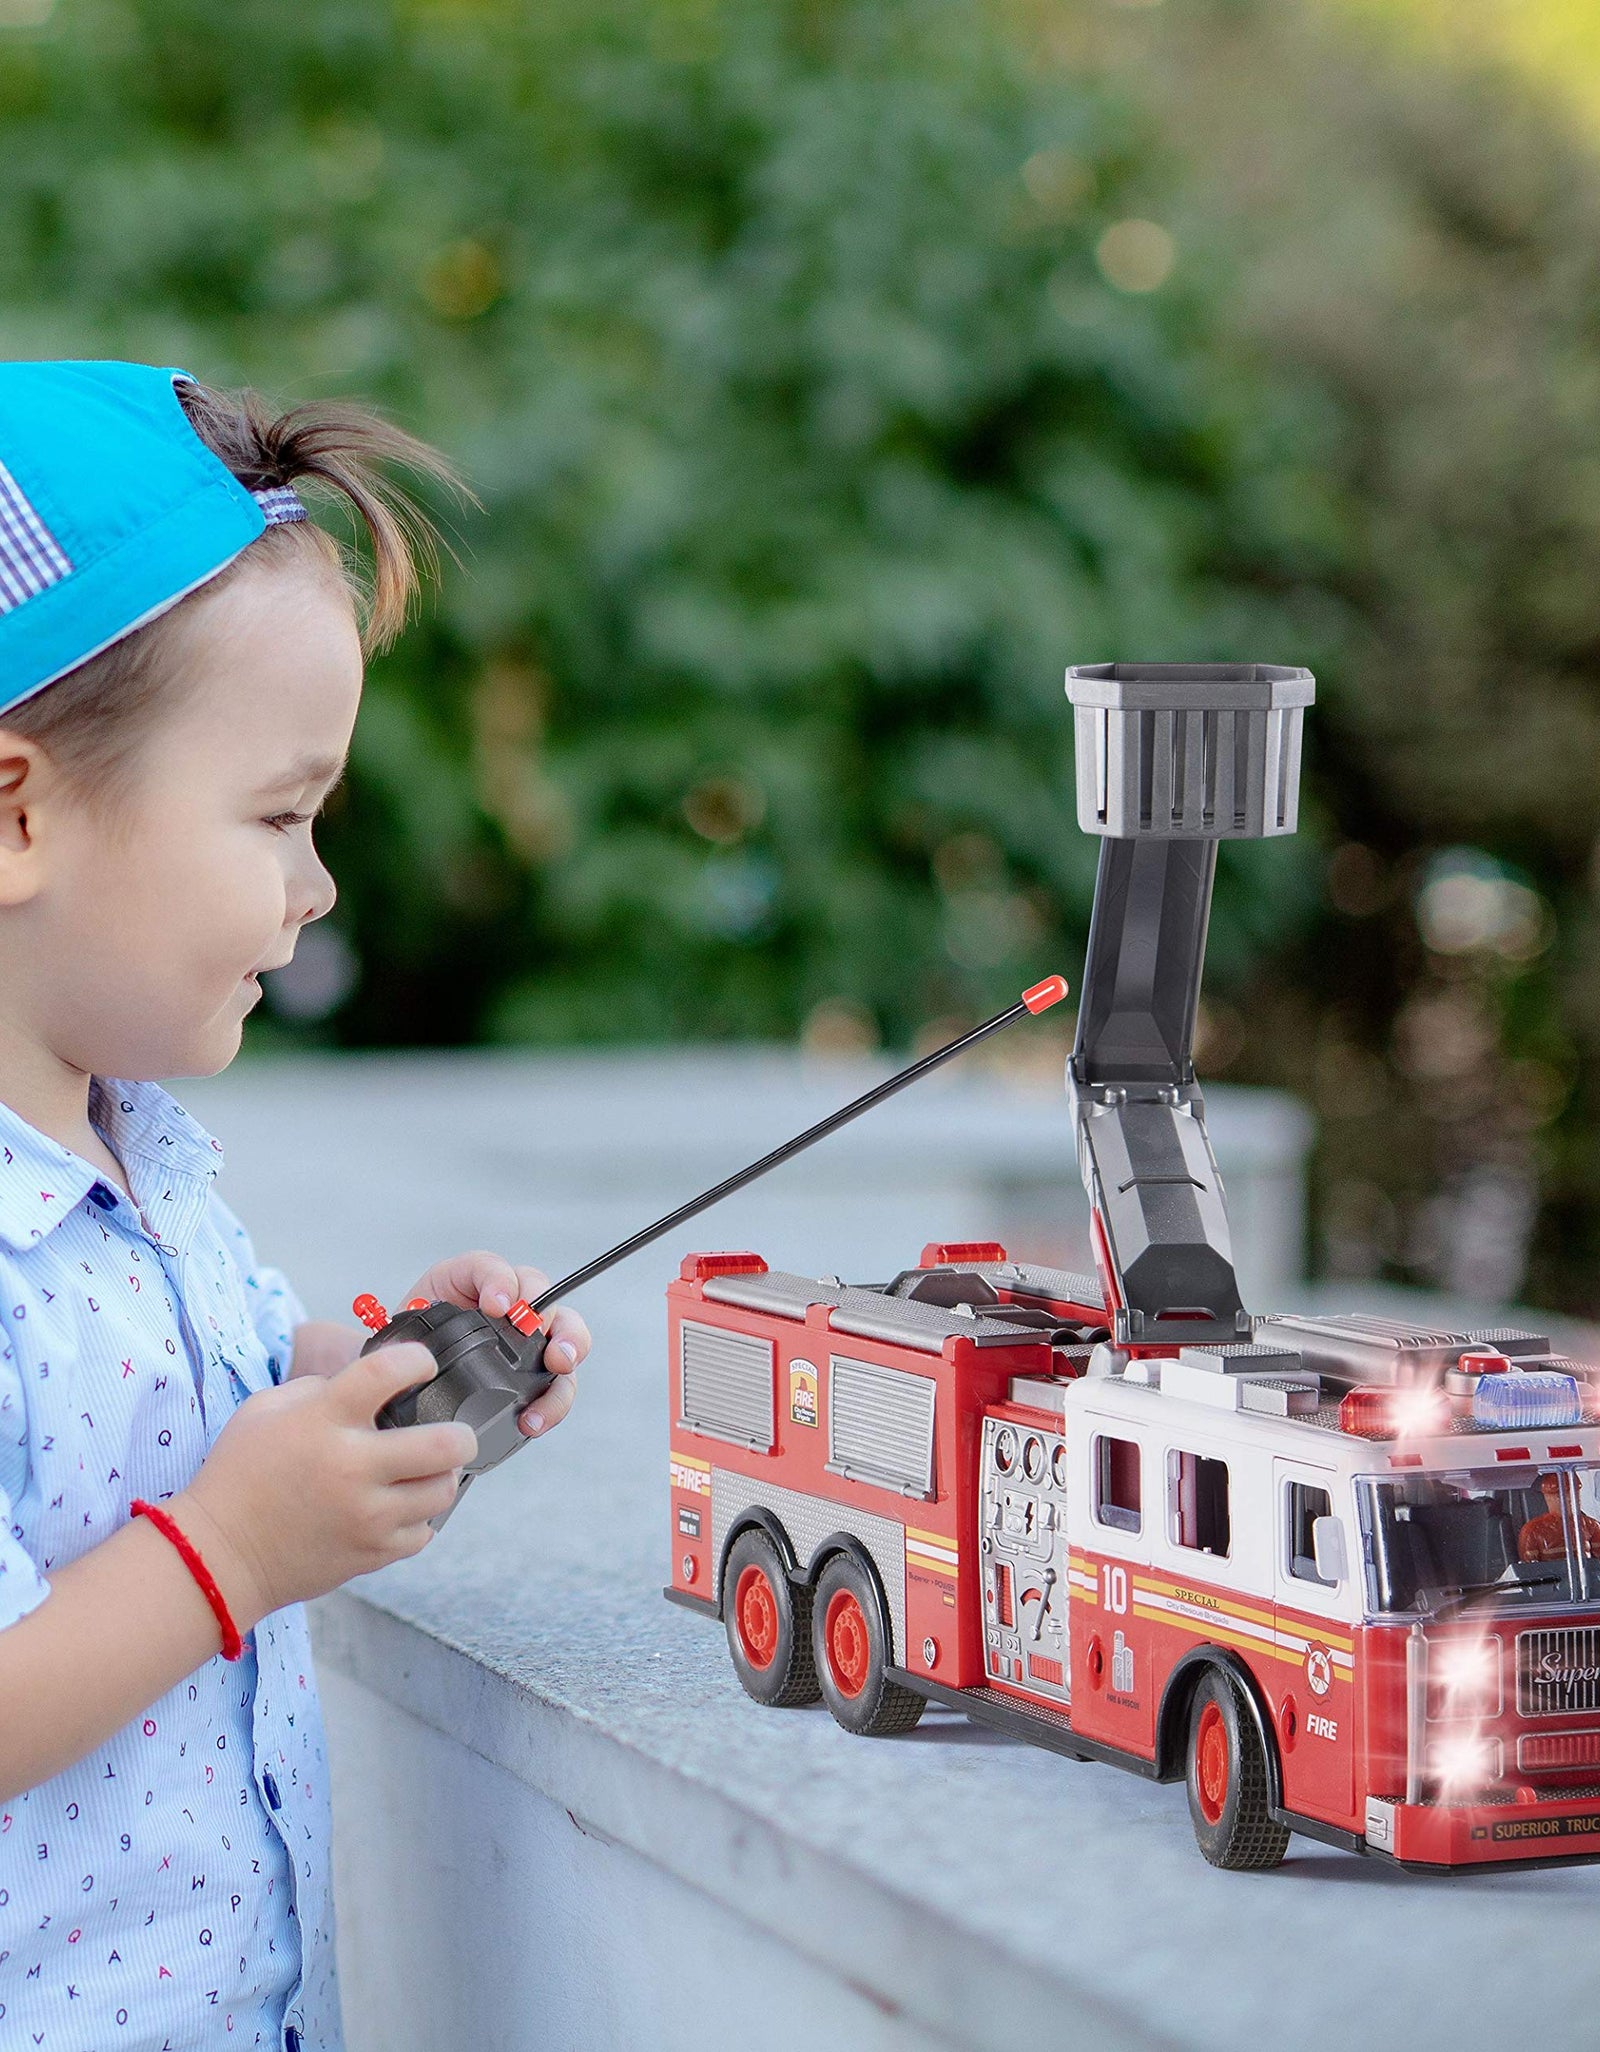 Prextex RC Fire Truck Toy for Kids with Remote Control, Lights, and Siren Sounds Large 14-Inch Fire Truck Best Gifts Toys for Boys